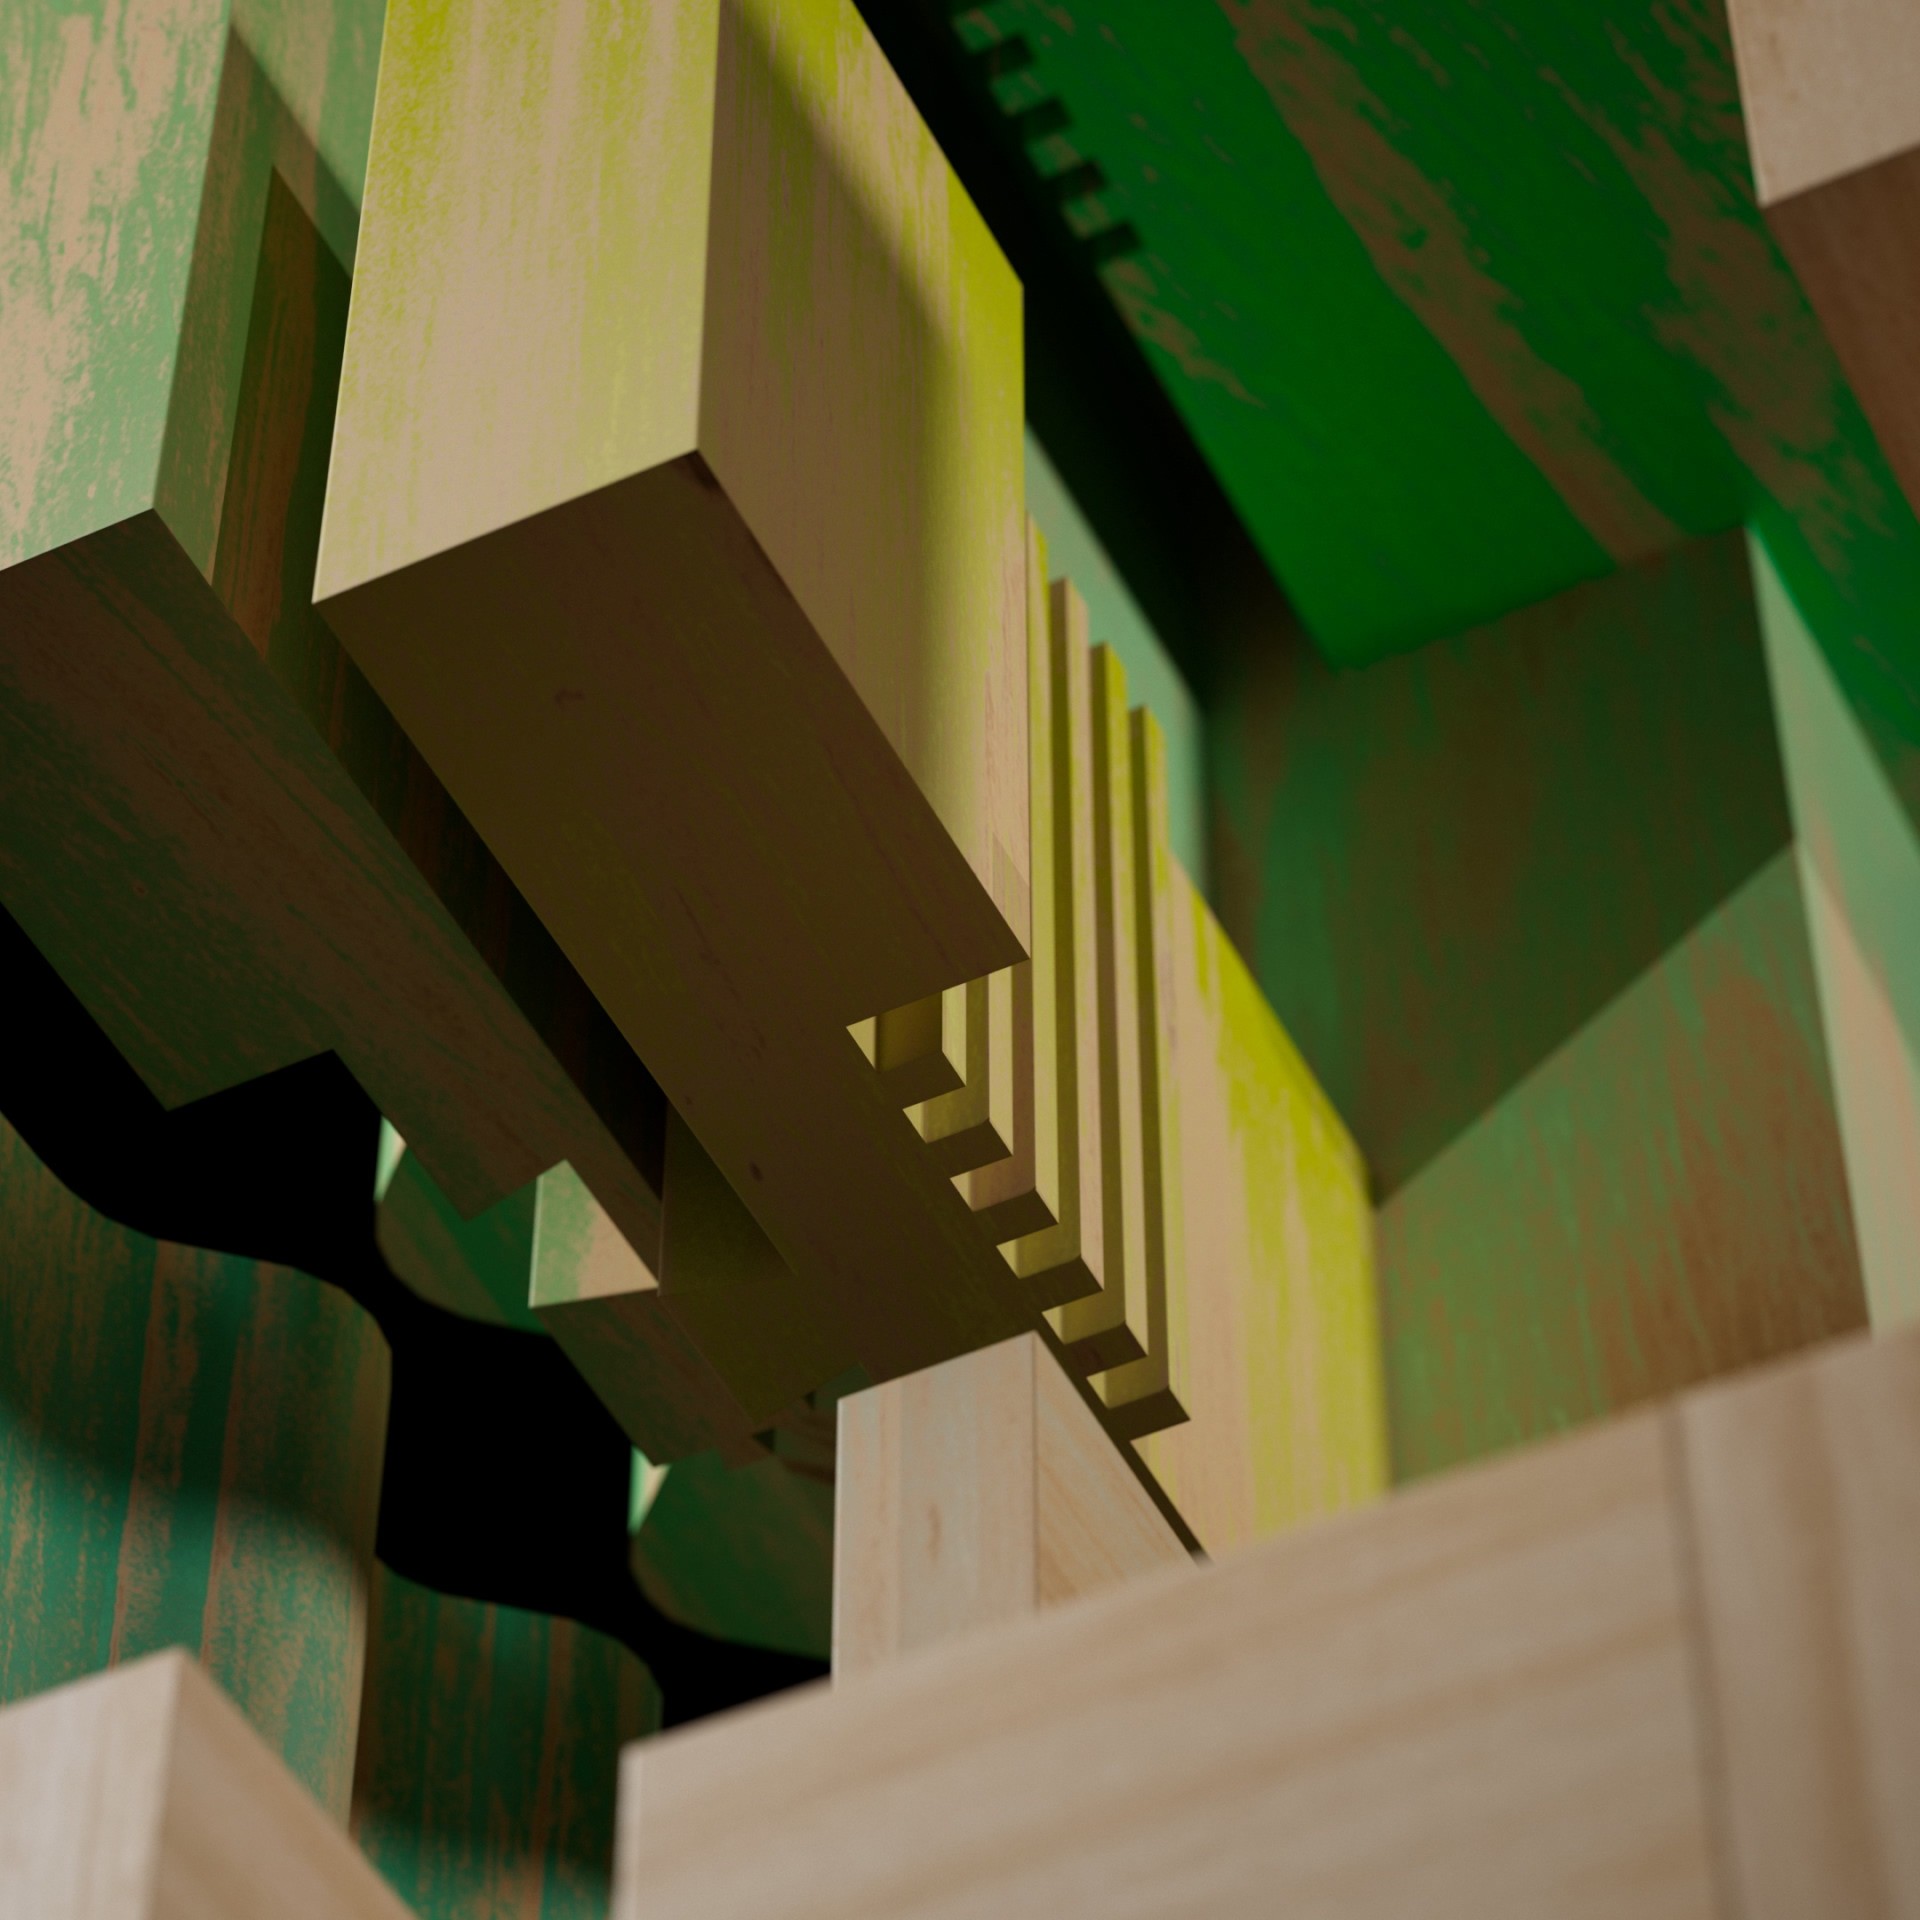 Close up of fragmented joinery coming together